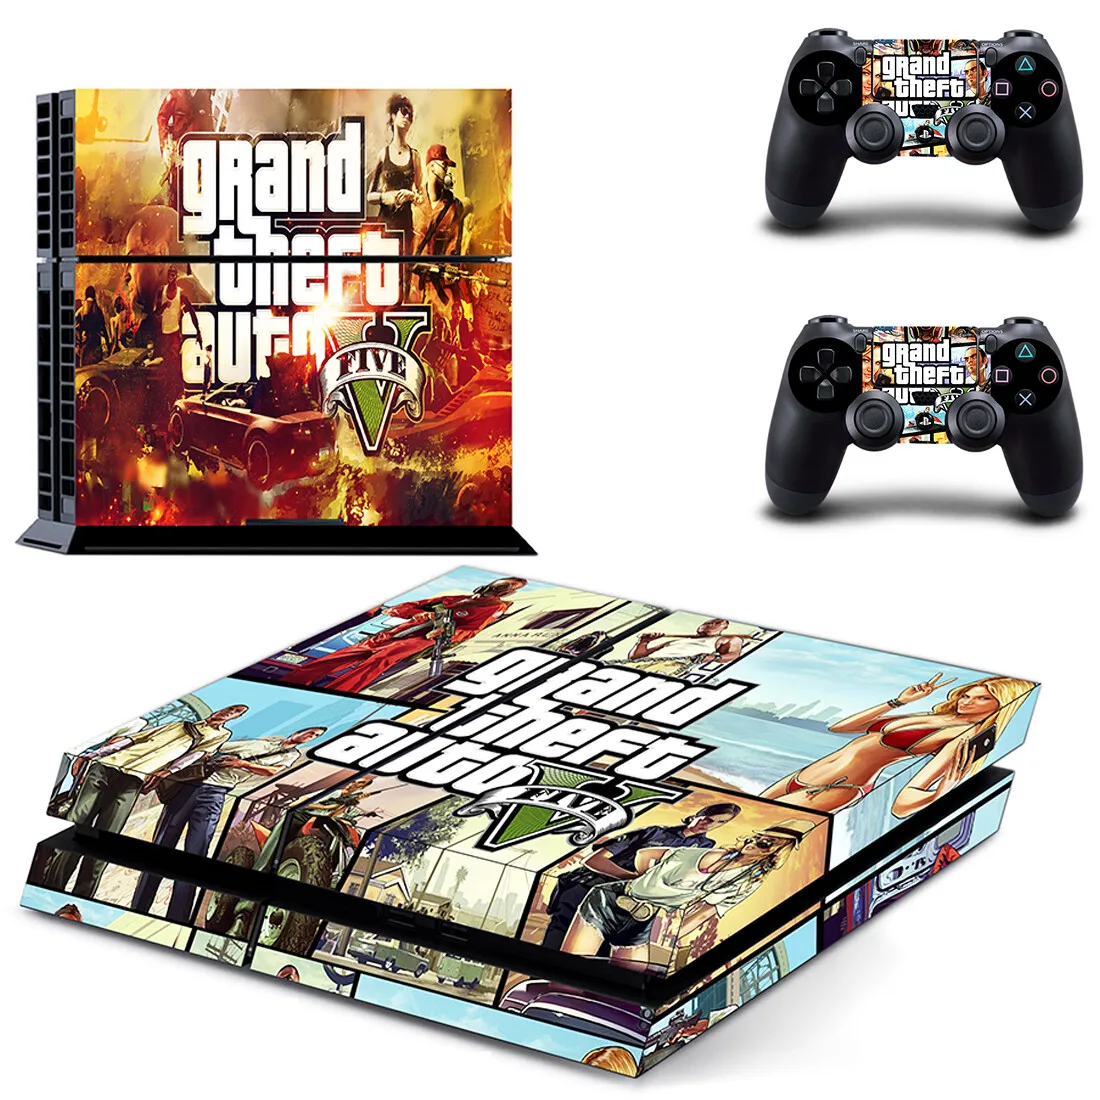 

Grand Theft Auto GTA5 PS4 Stickers Play station 4 Skin Sticker Decals For PlayStation 4 PS4 Console & Controller Skins Vinyl